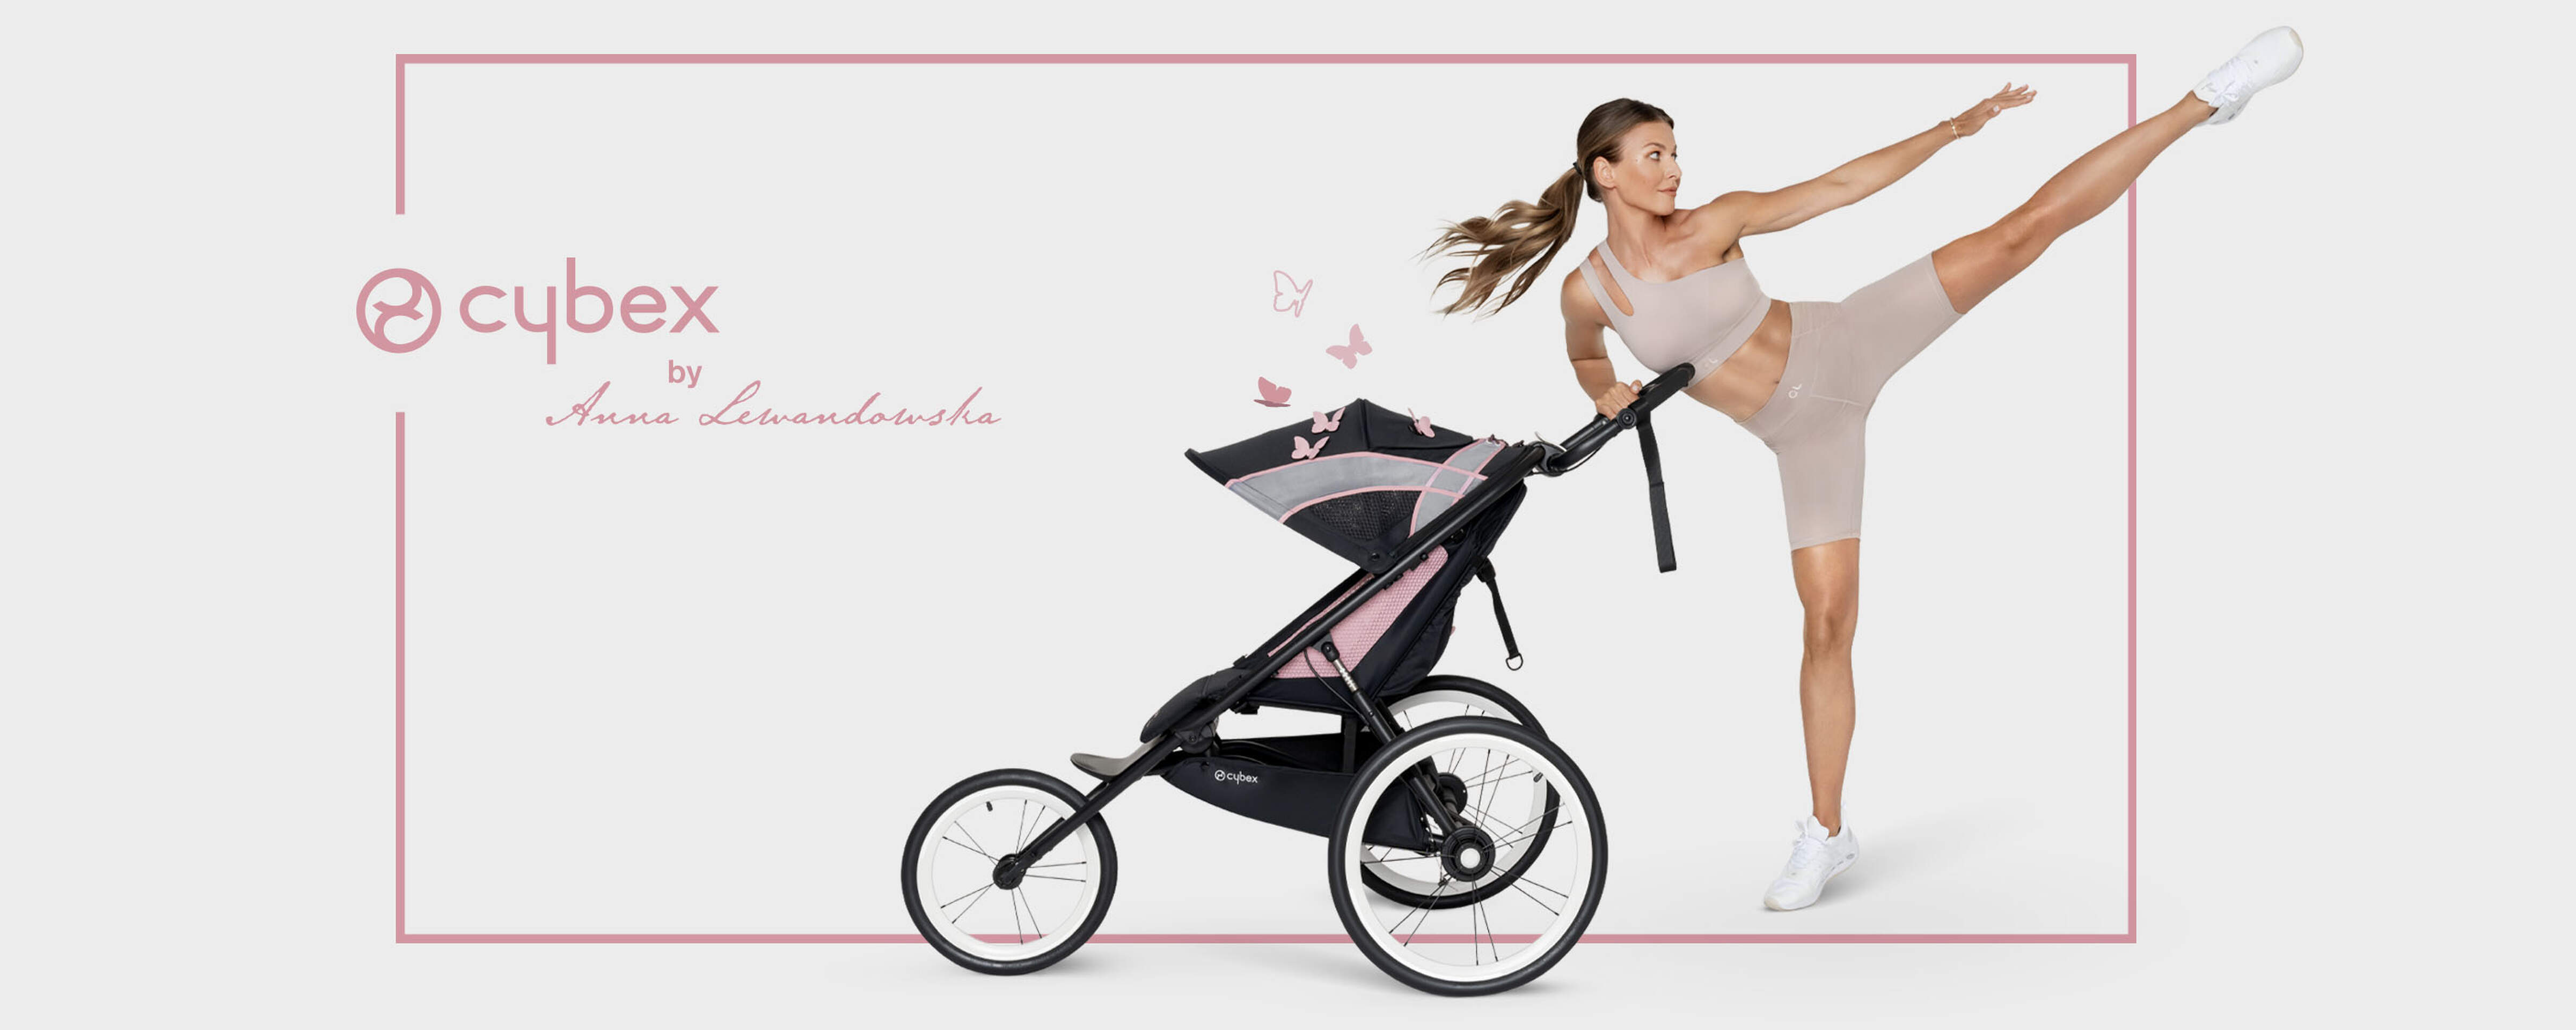 Cybex Gold by Anna Lewandowska Sport Collection Image Campaign